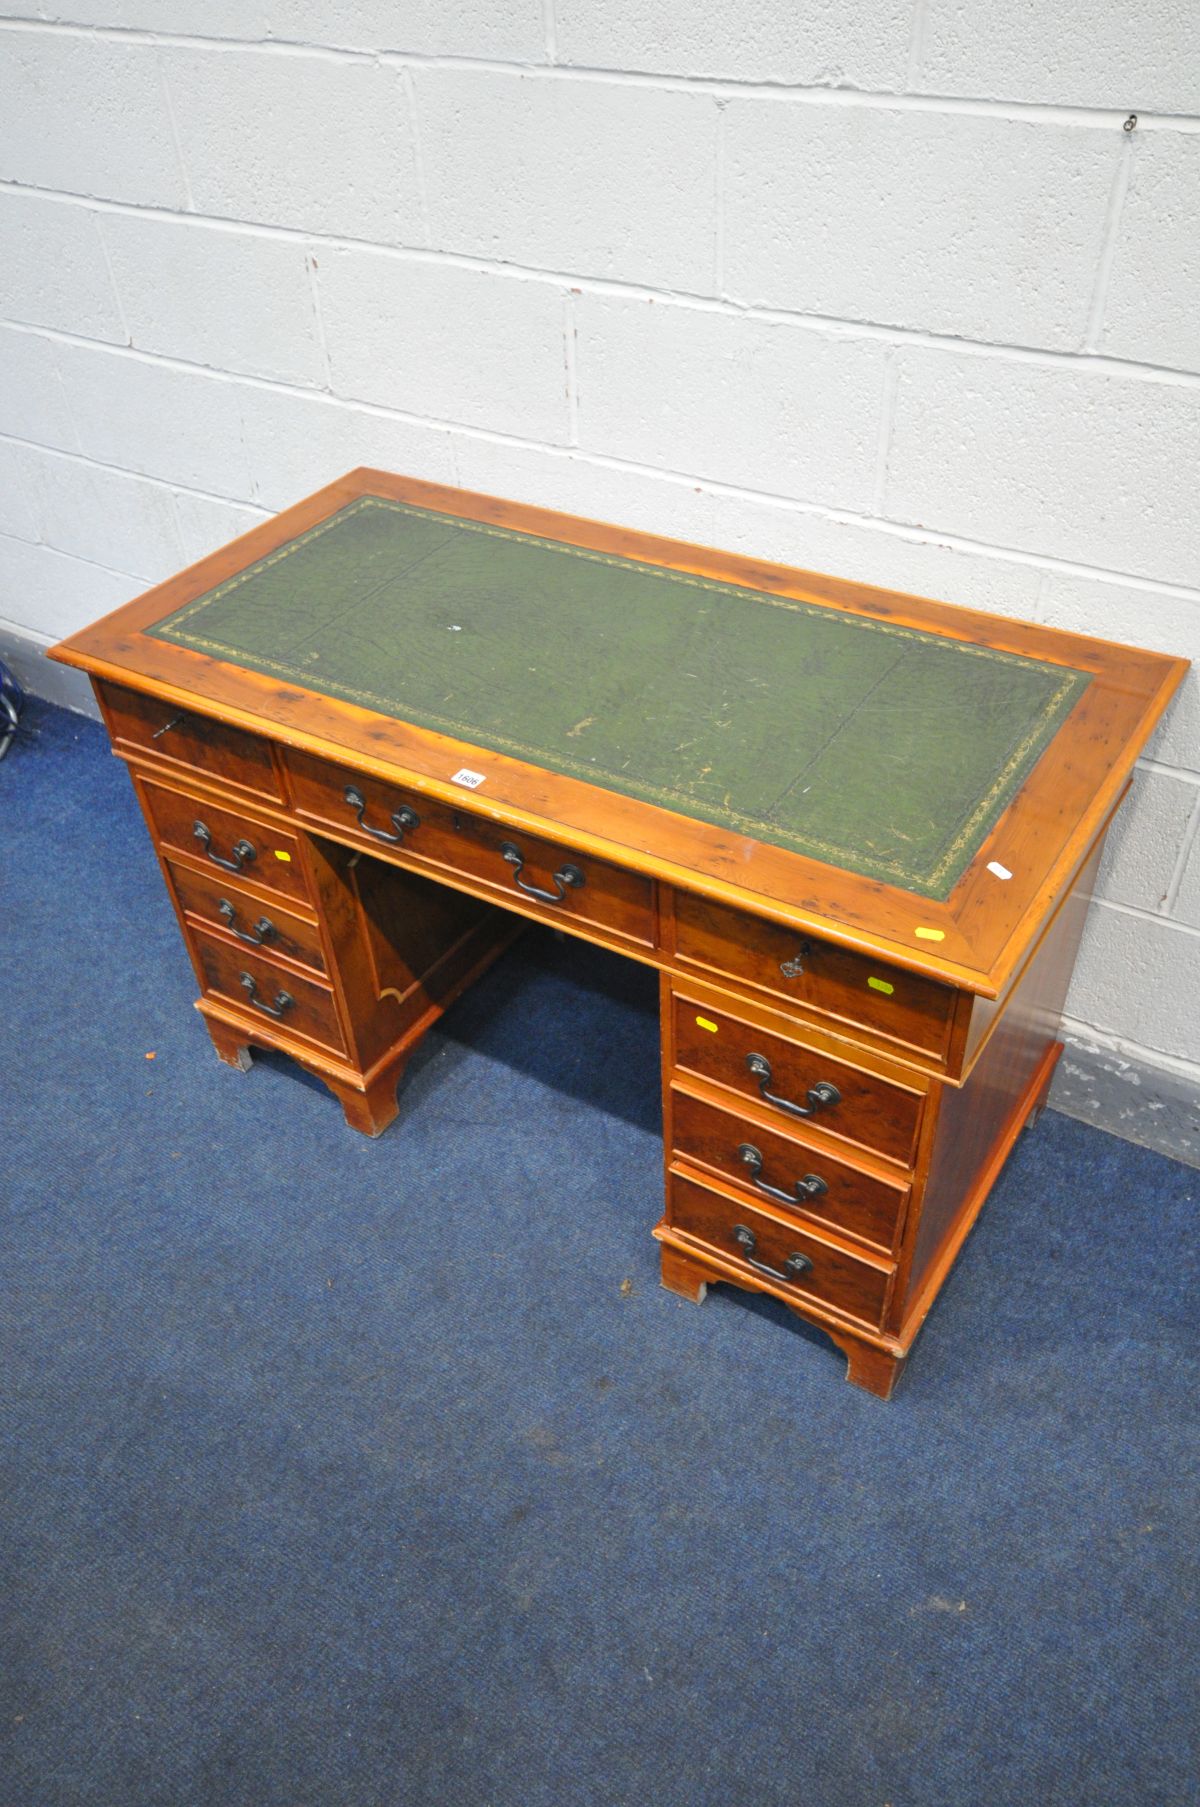 A REPRODUCTION YEW WOOD PEDESTAL DESK, green tooled leather inlay top, width 124cm x depth 62cm x - Image 3 of 3